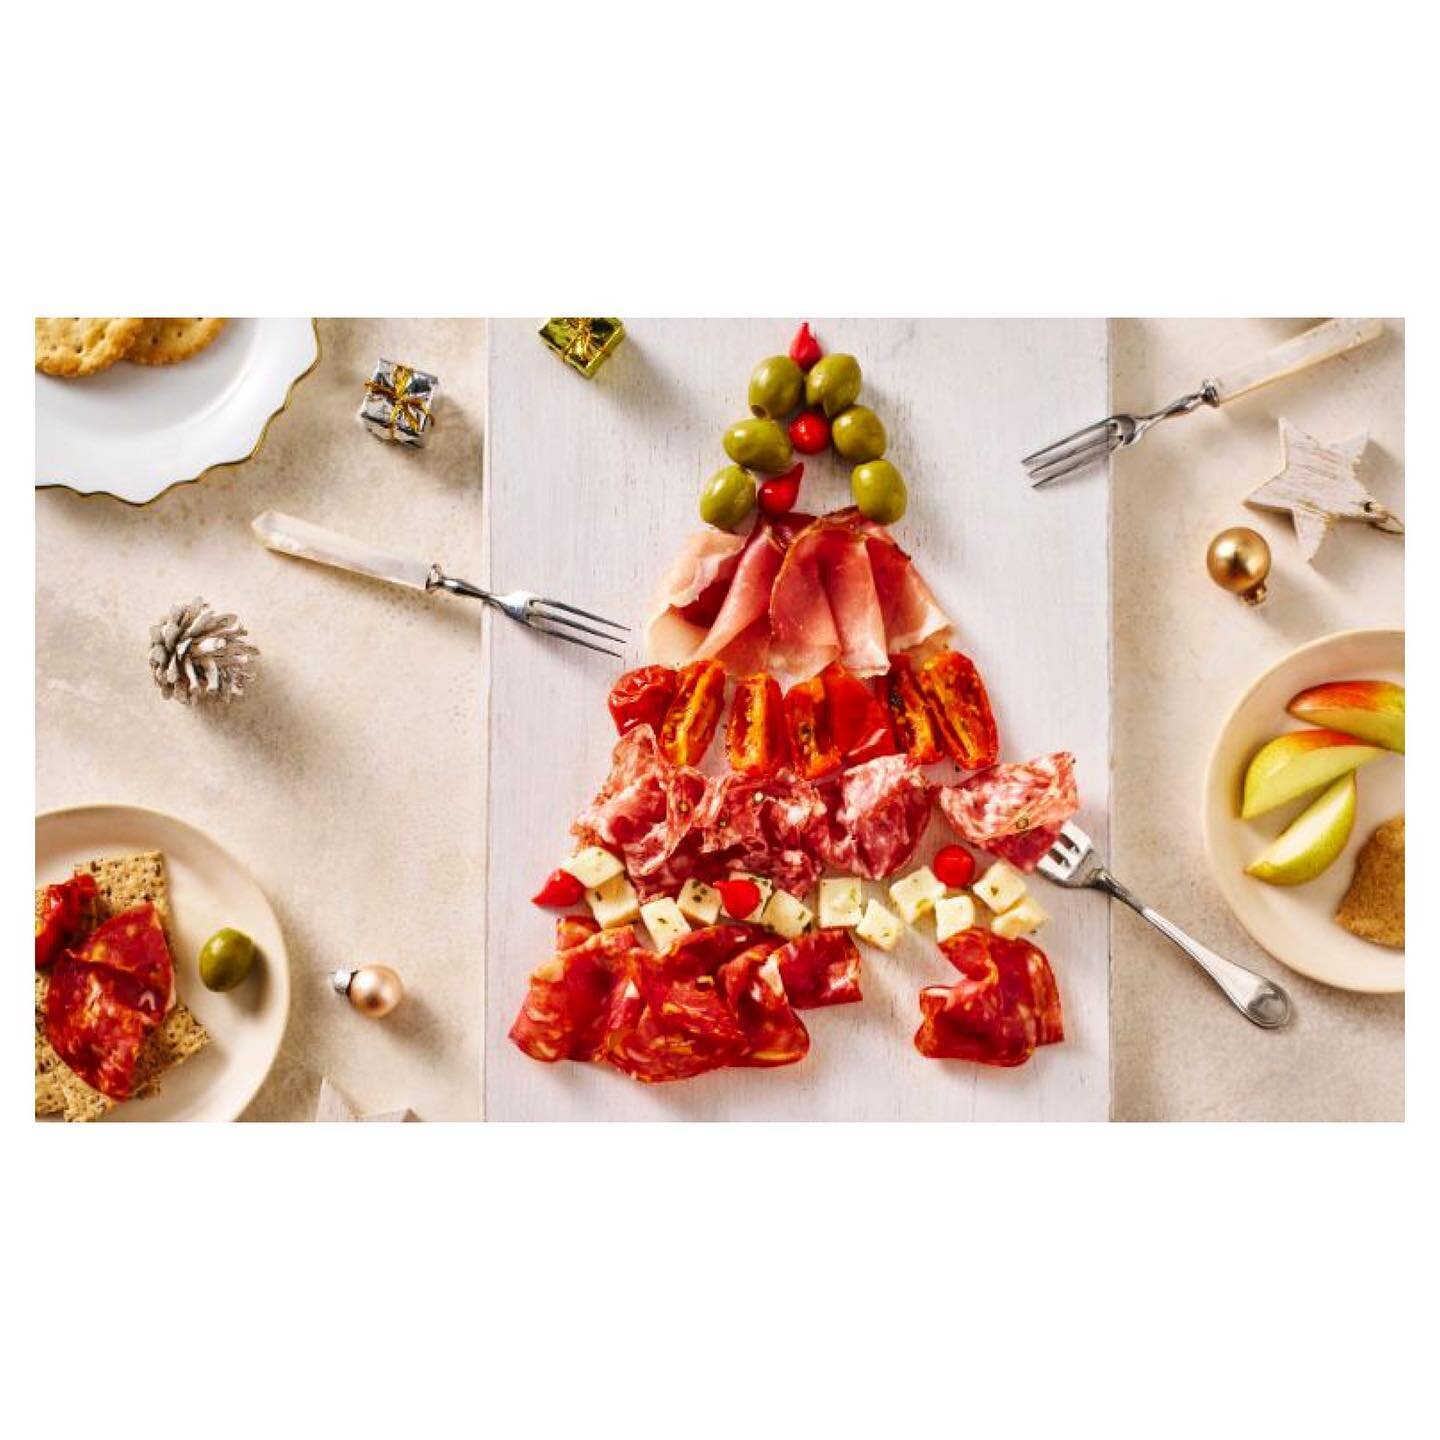 Yes it&rsquo;s a CHARCUTERTREE 🎄 styled for @sainsburys Xmas products range with the lovely @joe_giacomet and @louiewaller on props, @poppybertram on the assist 👩&zwj;🍳 Never handled so much ham HO HO HO 🐷🤶 #foodstyling #christmas #christmasfood